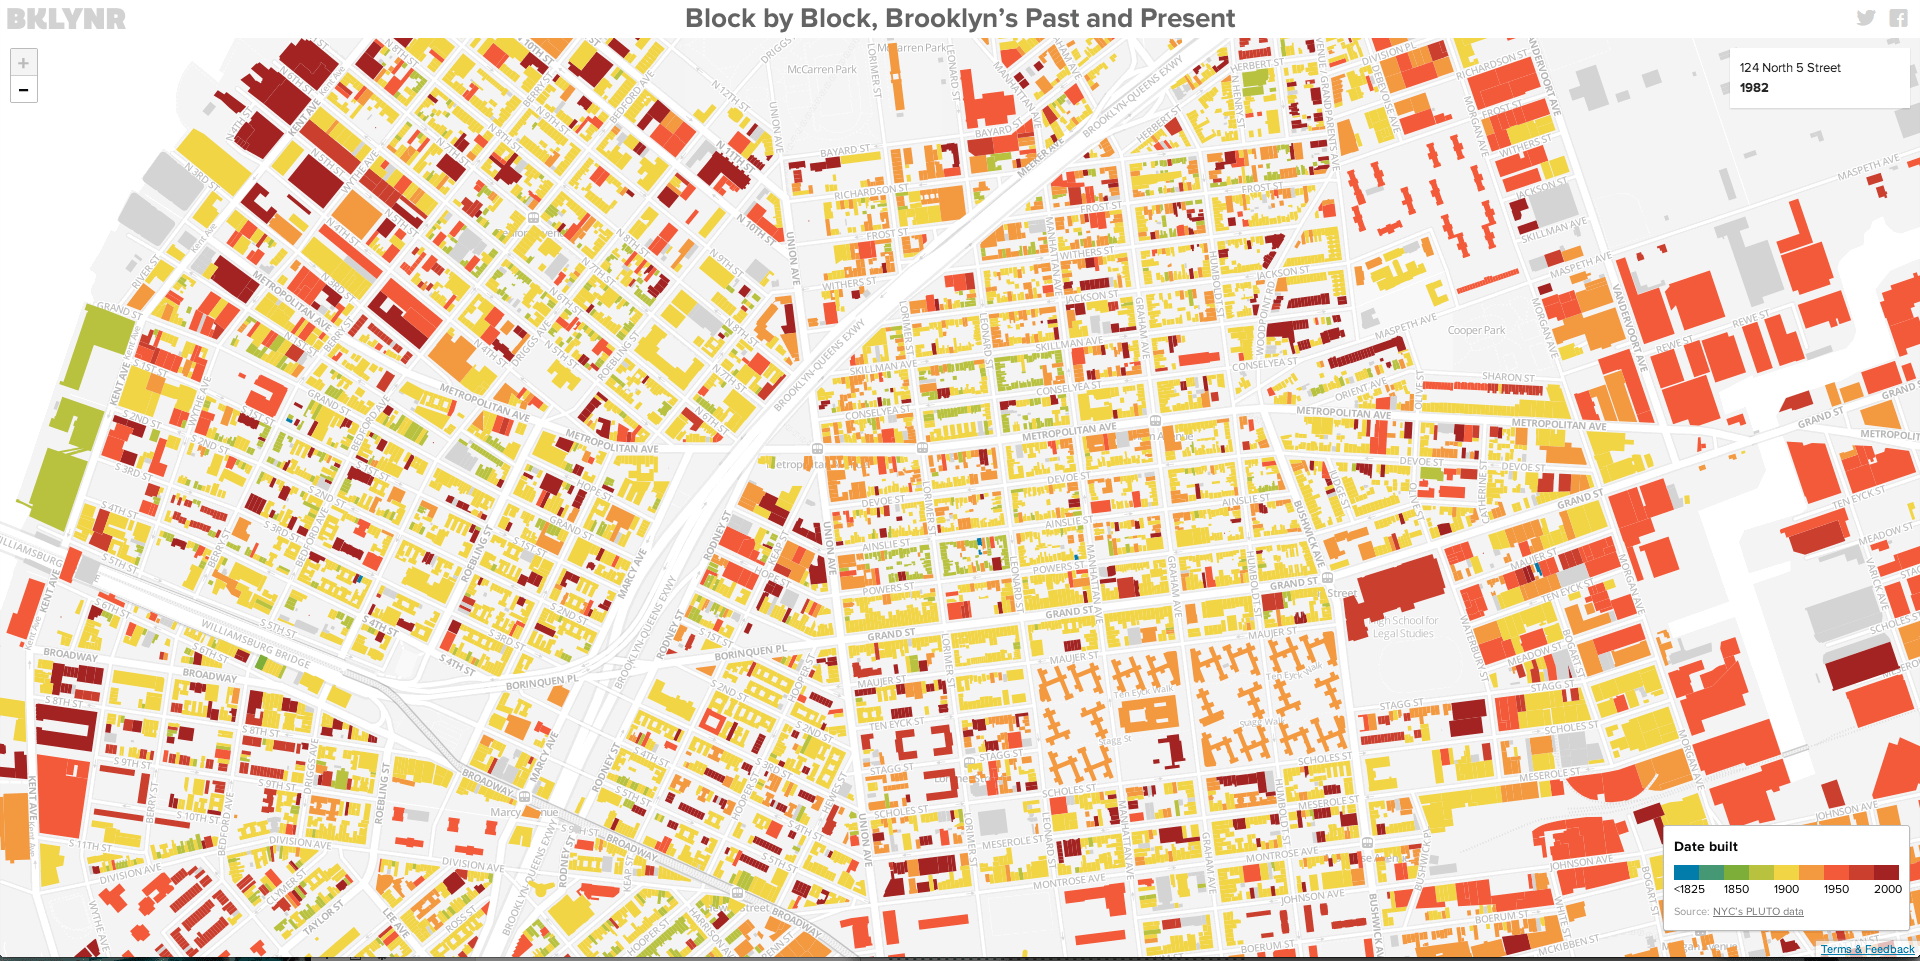 This Interactive Map Of Brooklyn Colours Every Building According To Age